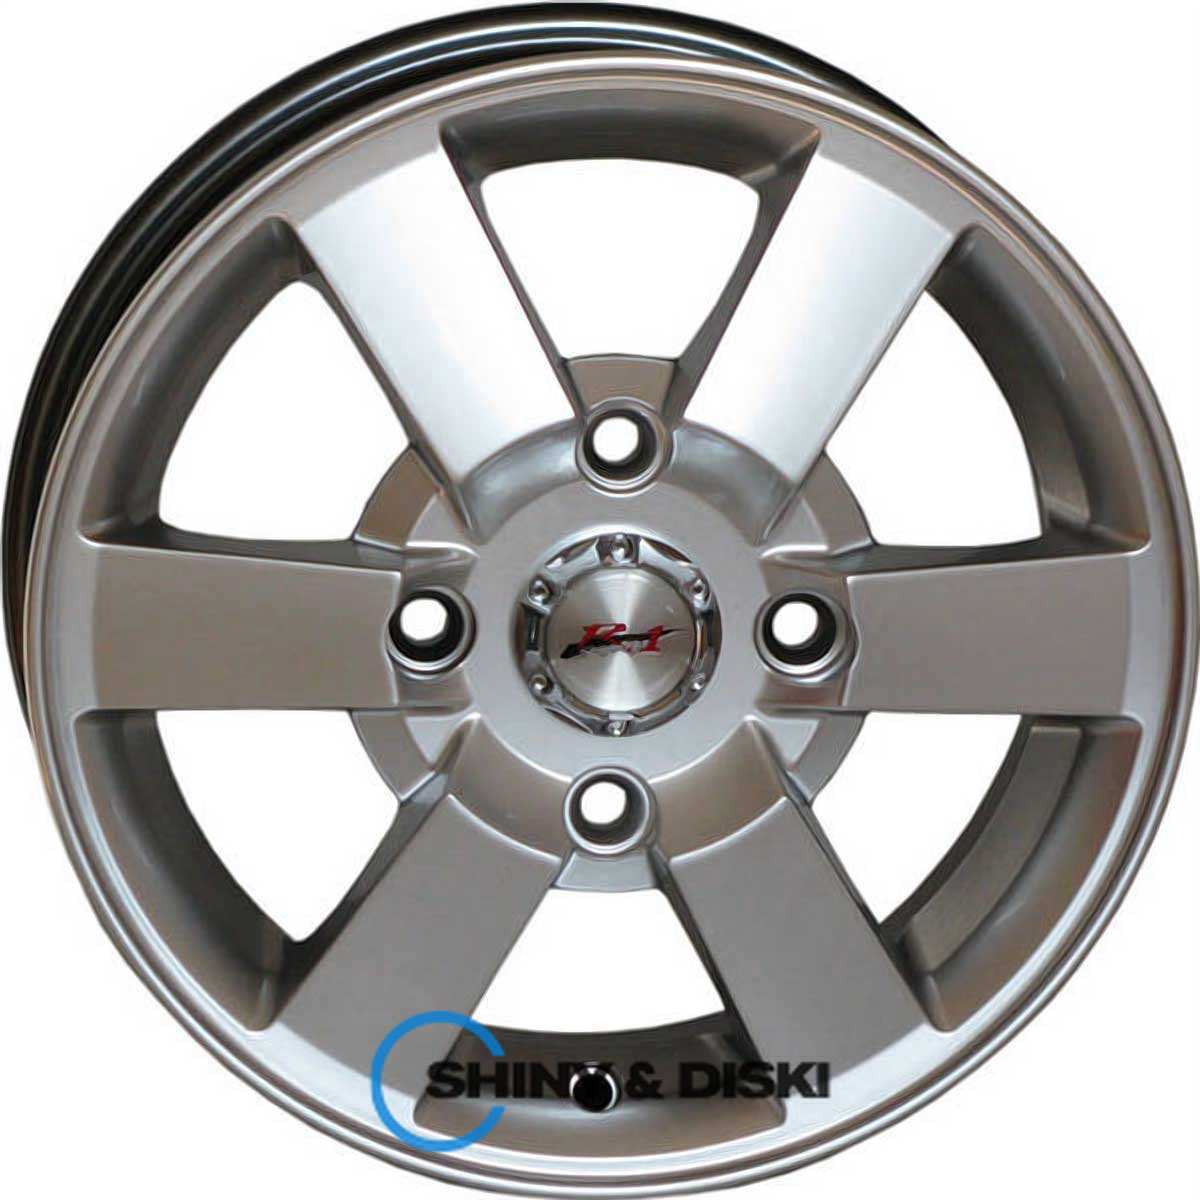 rs tuning 501 s r13 w4.5 pcd4x114.3 et40 dia69.1